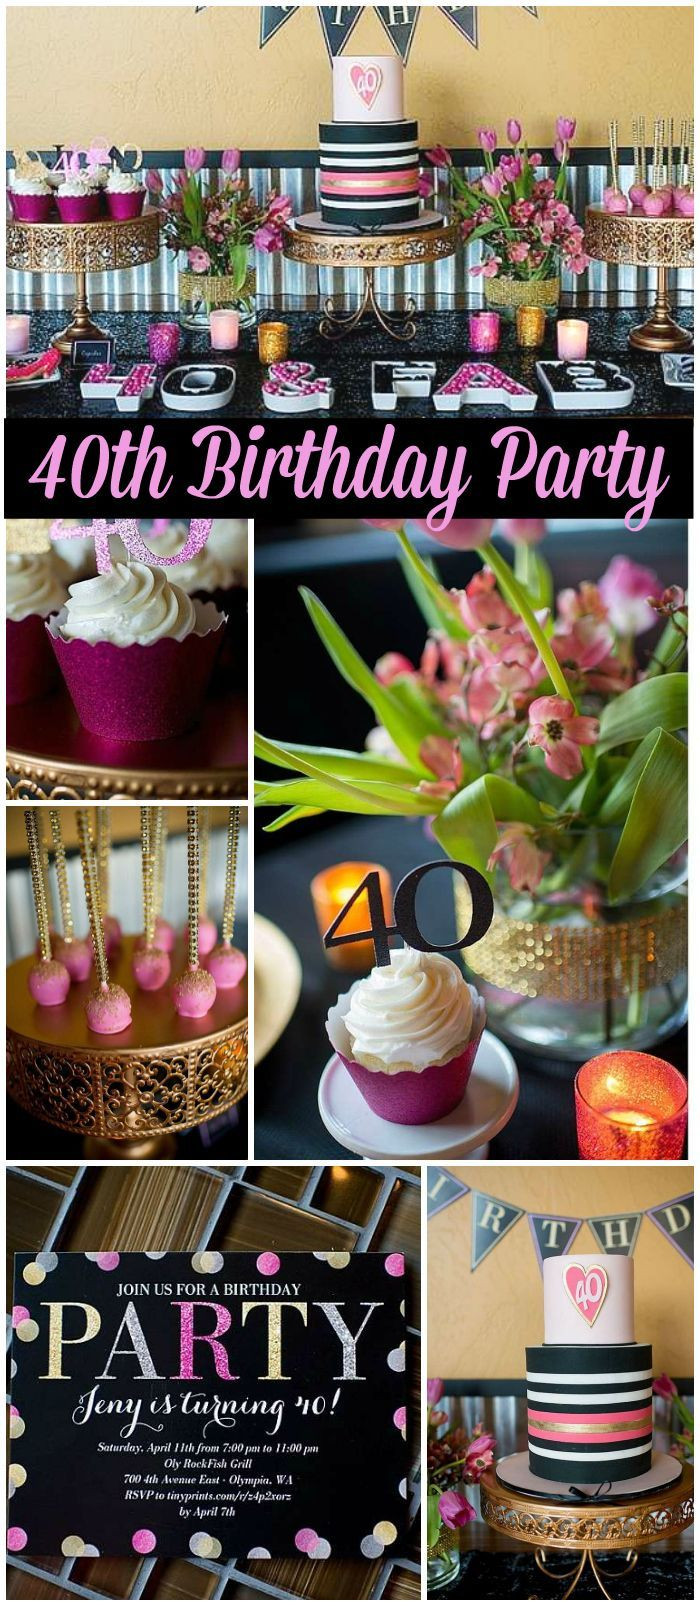 40th Birthday Party Activities
 Check out this glamorous 40th birthday party with stylish